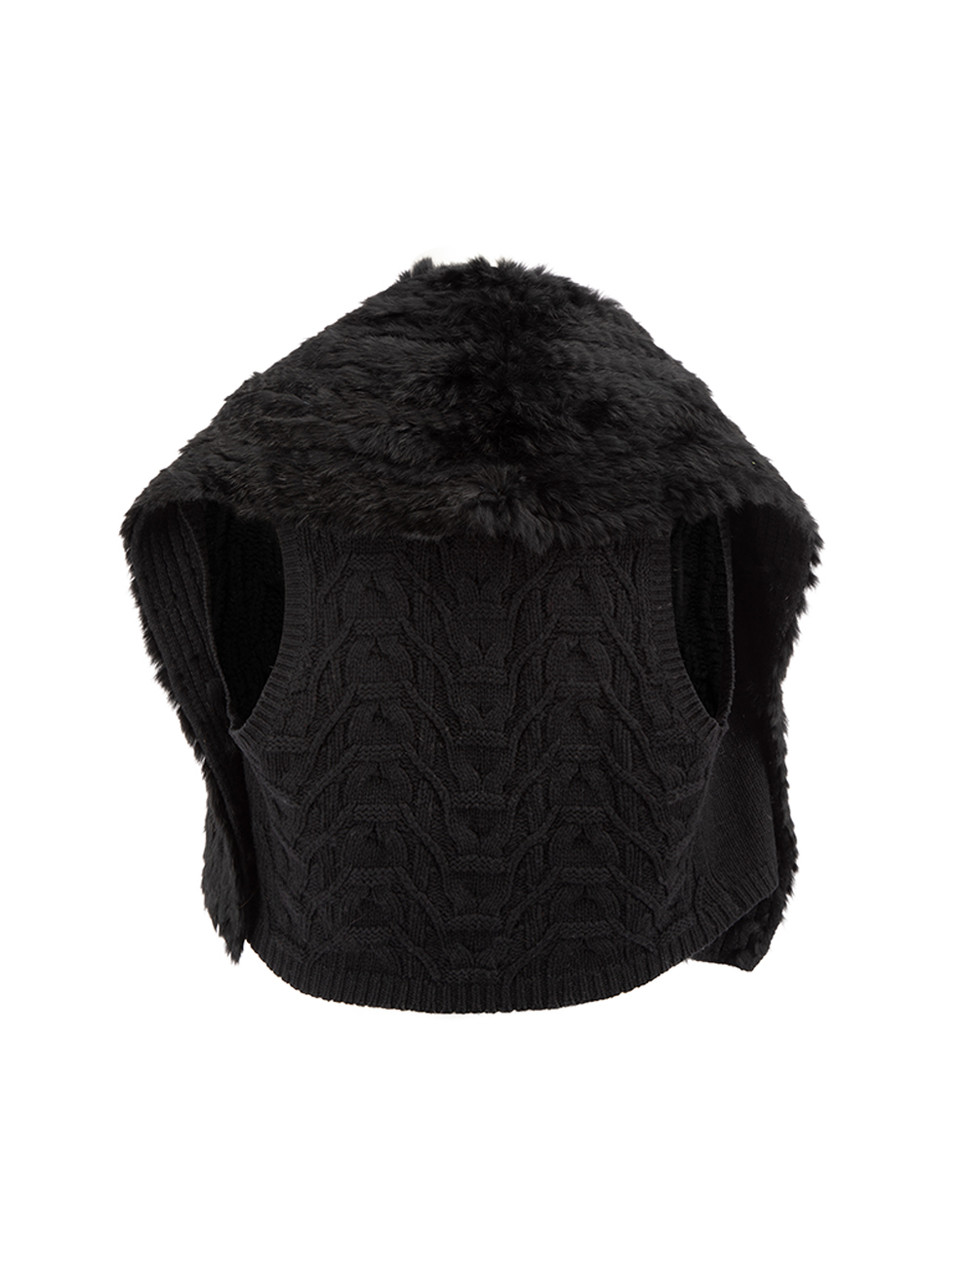 Marc Jacobs Marc by Marc Jacobs Black Rabbit Fur Knitted Gilet